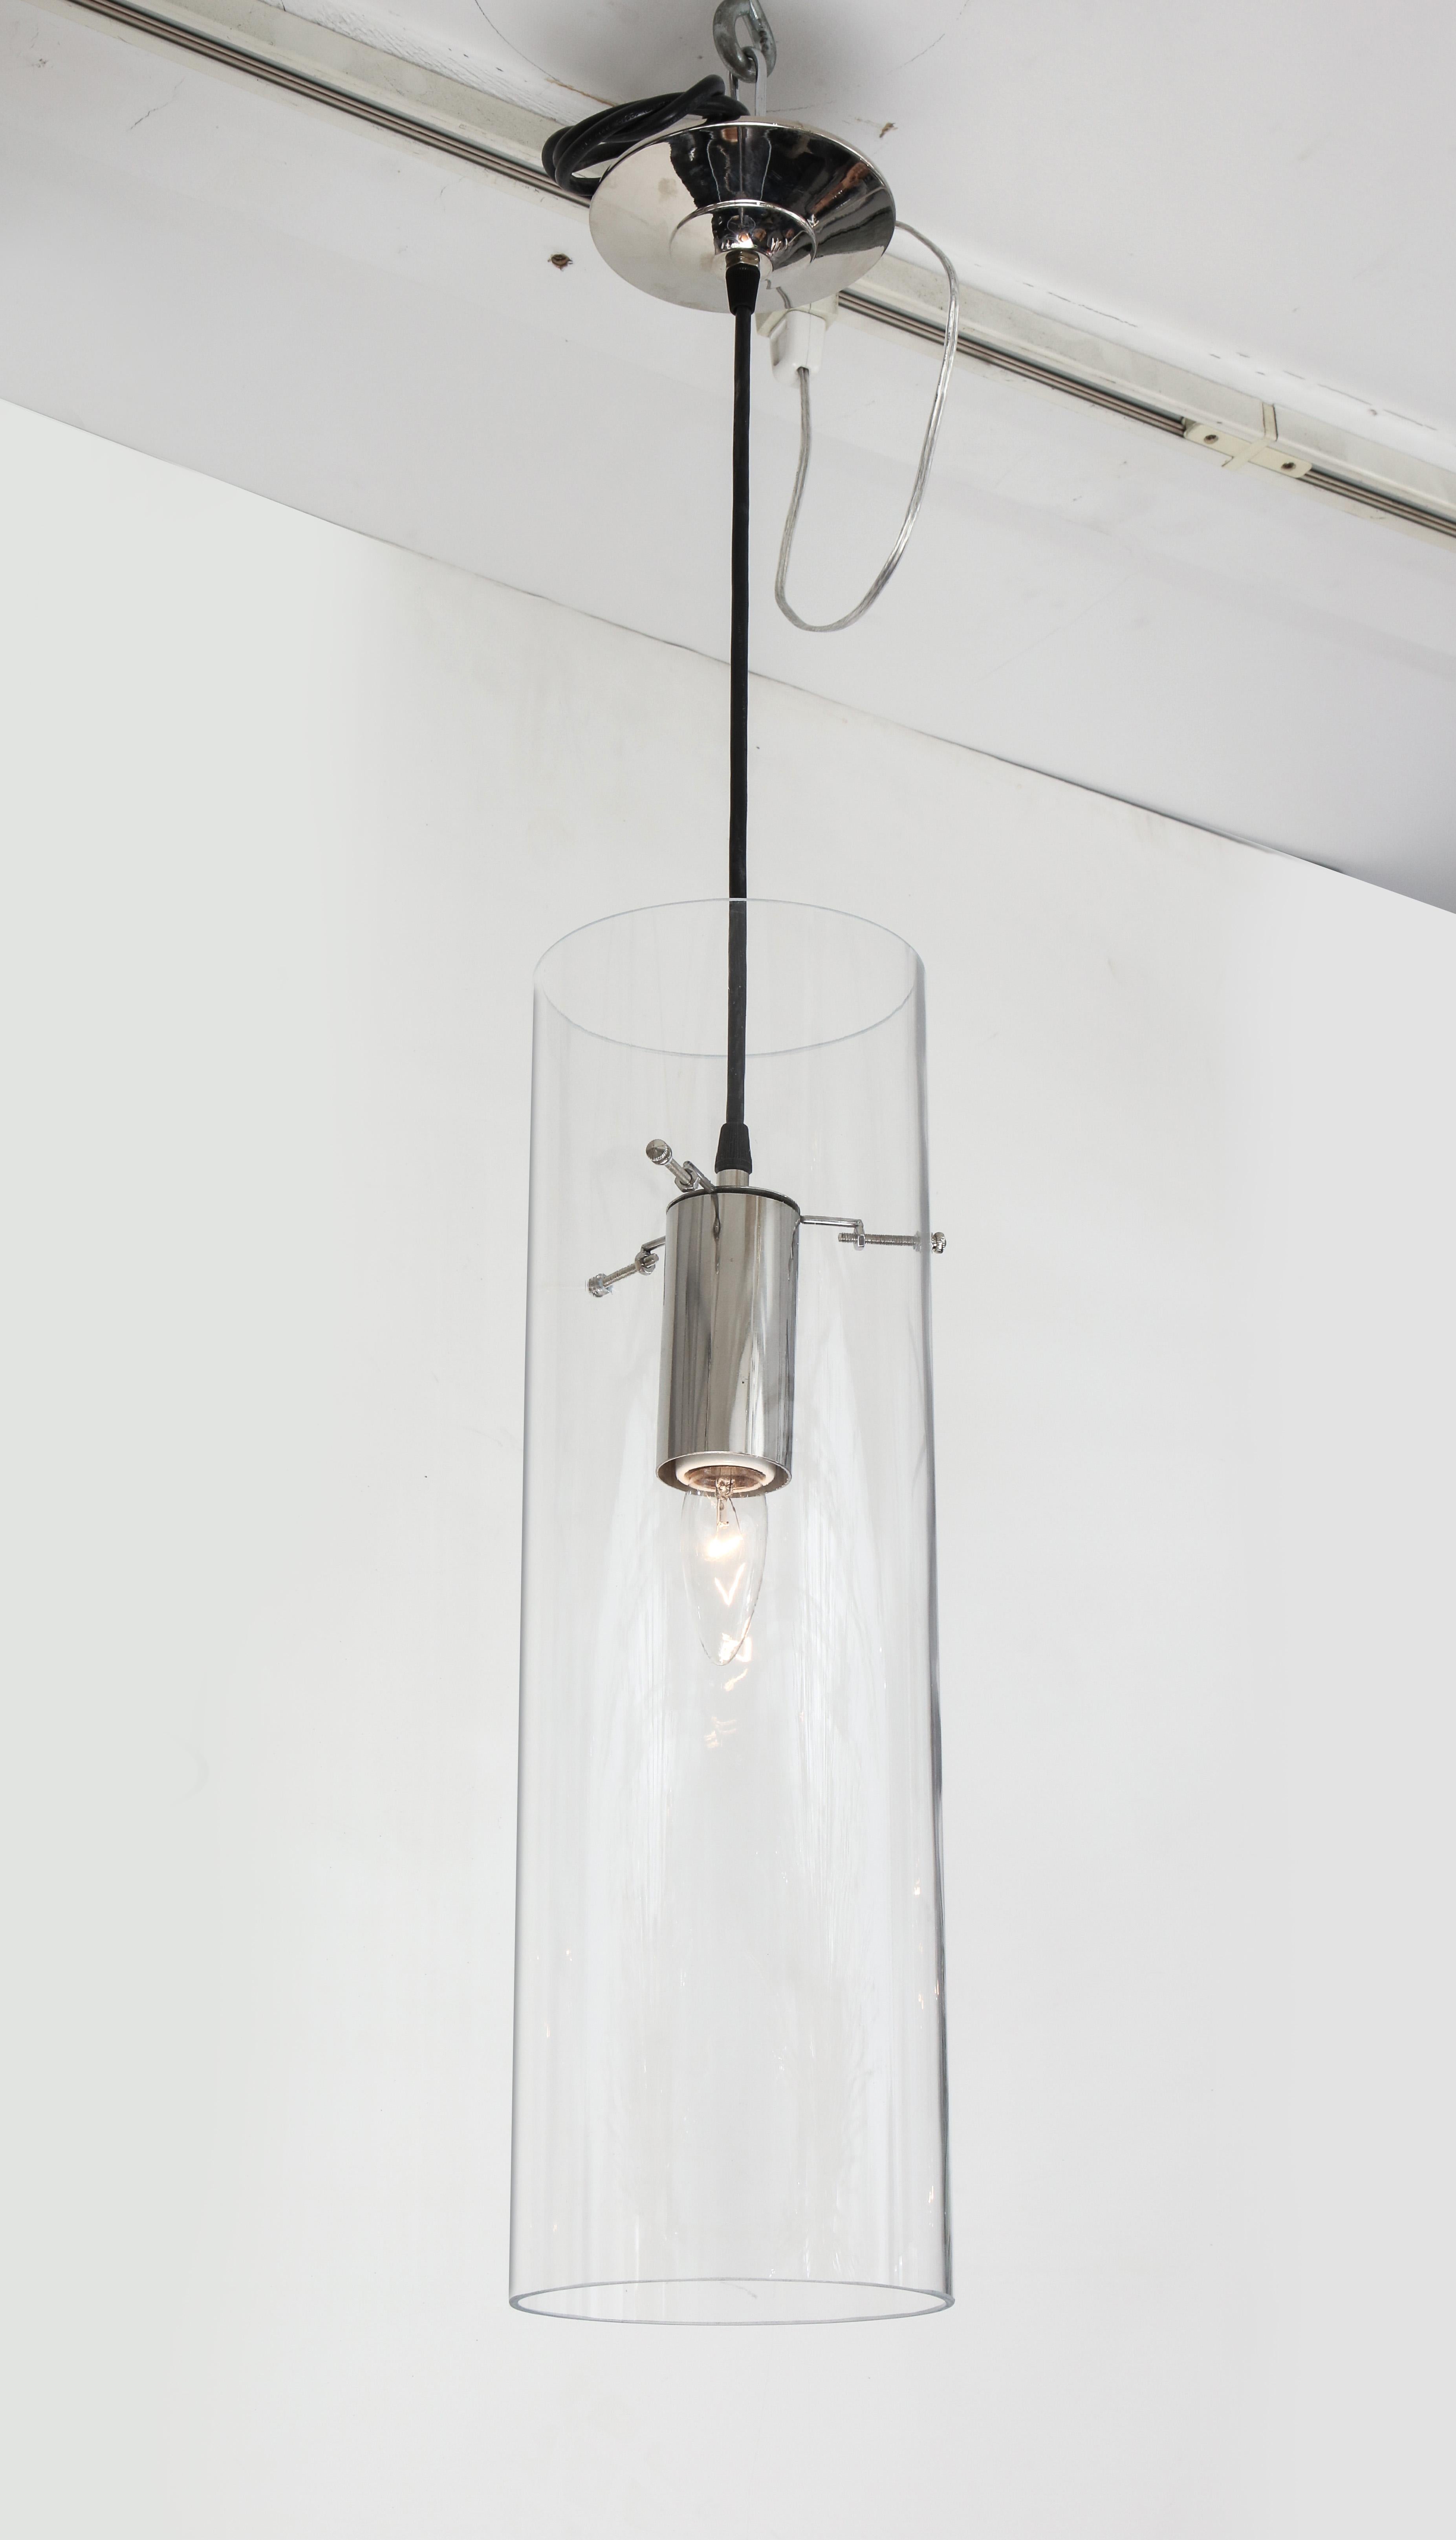 Custom single tubular acrylic pendant light. Customization is available in different sizes and finishes. Please specify overall height you need upon order.